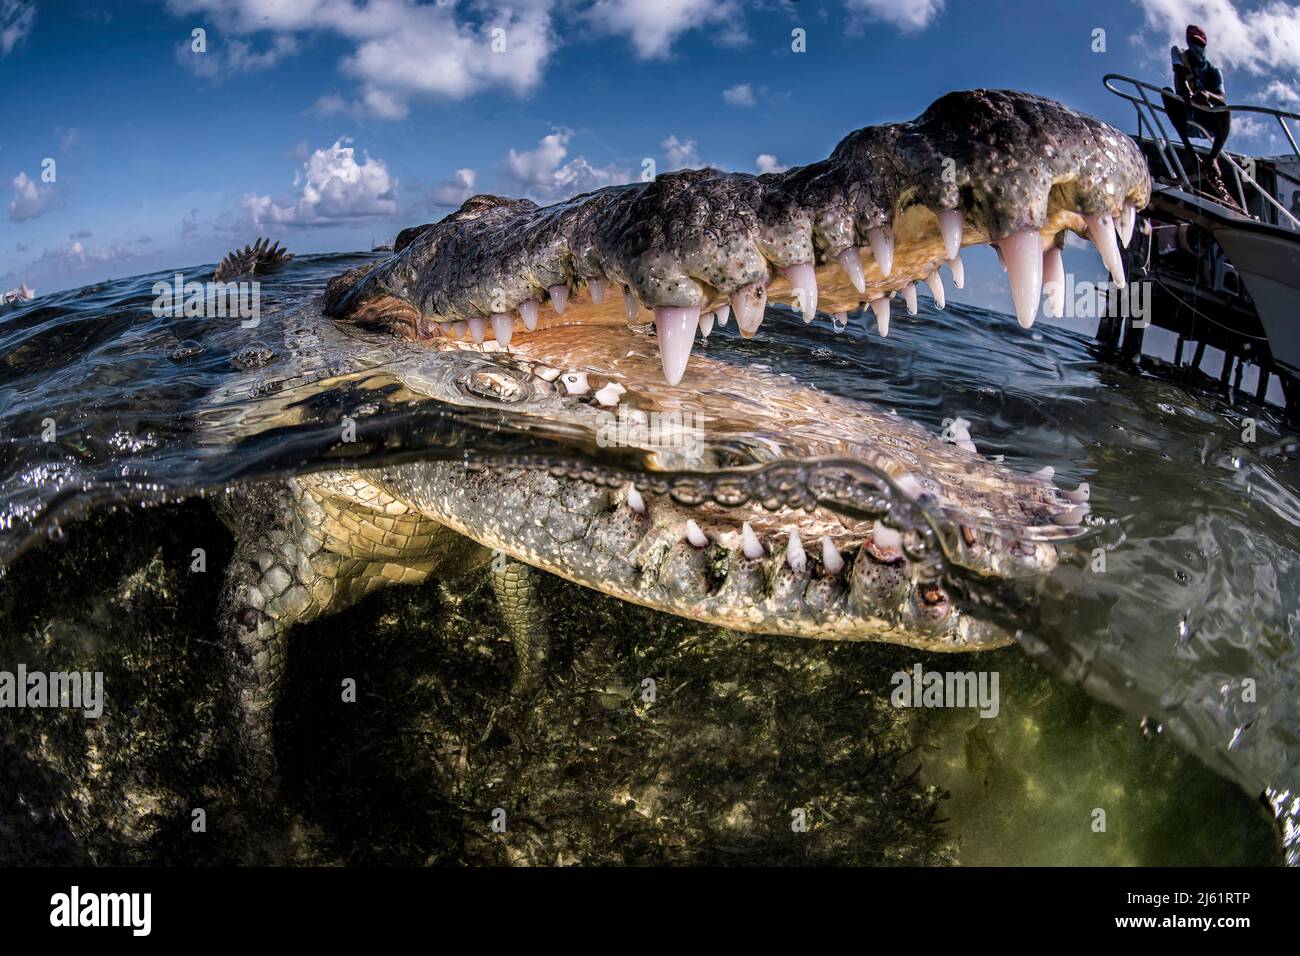 An american crocodile (Crocodylus acutus) in the shallow waters of Banco Chinchorro, a coral reef located off the southeastern coast of the municipali Stock Photo